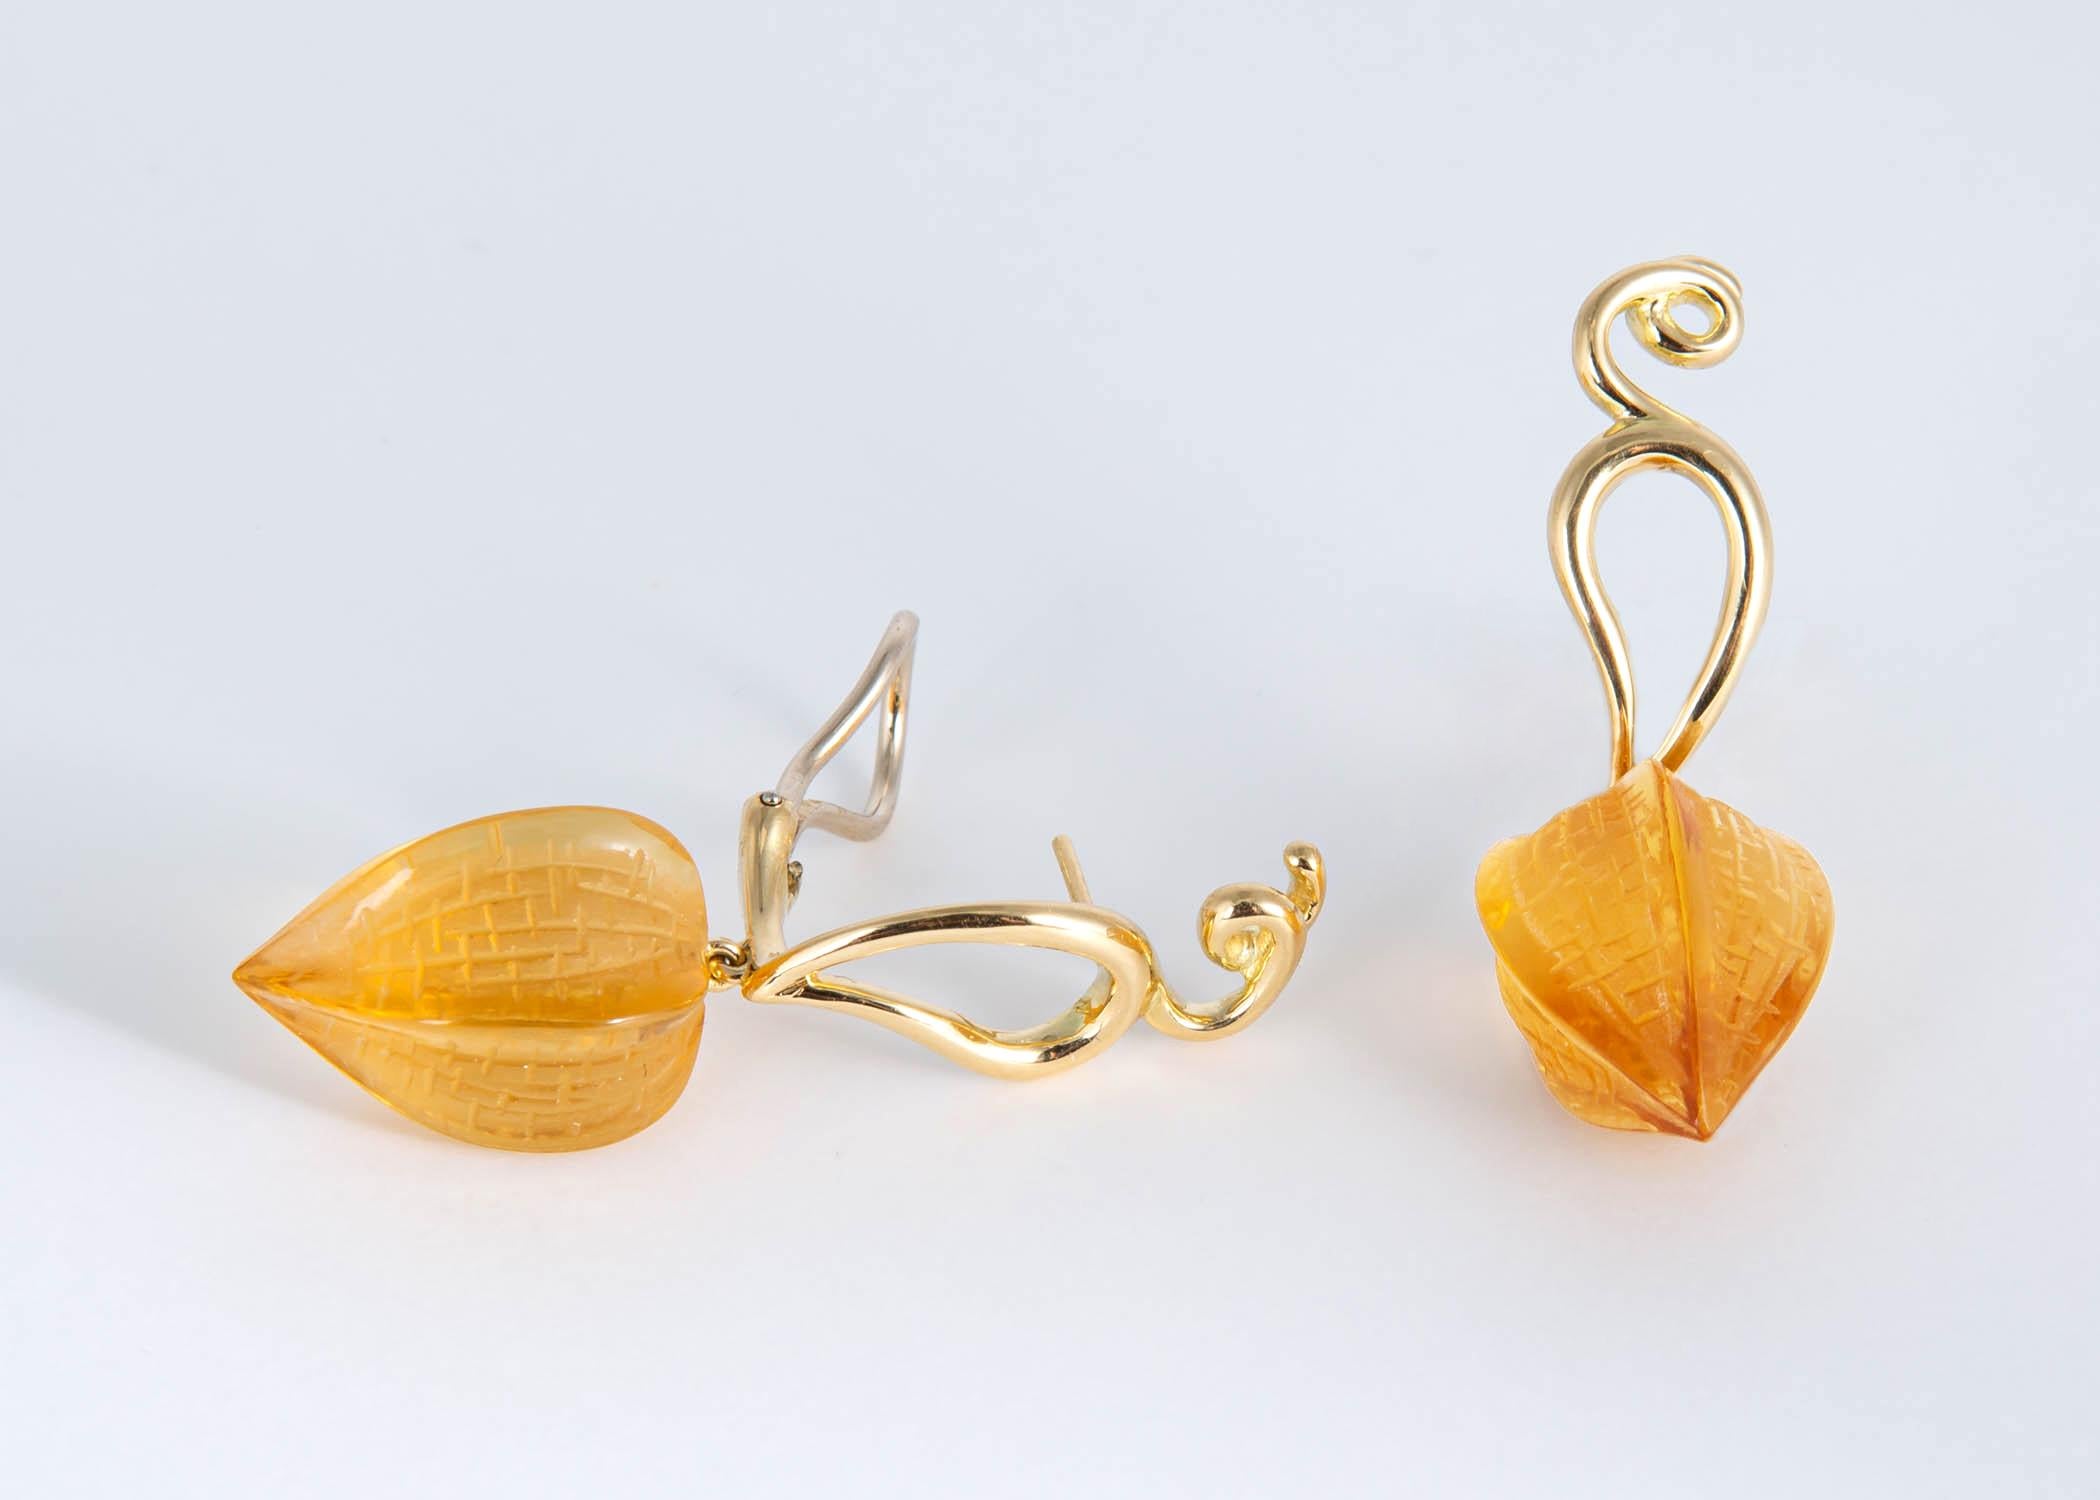 Paloma Picasso created a few designs featuring beautiful carved gemstones in the mid 1980's This earring has a matched pair of carved citrine floral pod shaped drops suspended from a vine motif earrings. 1 3/4's of an inch in length. Please ask me